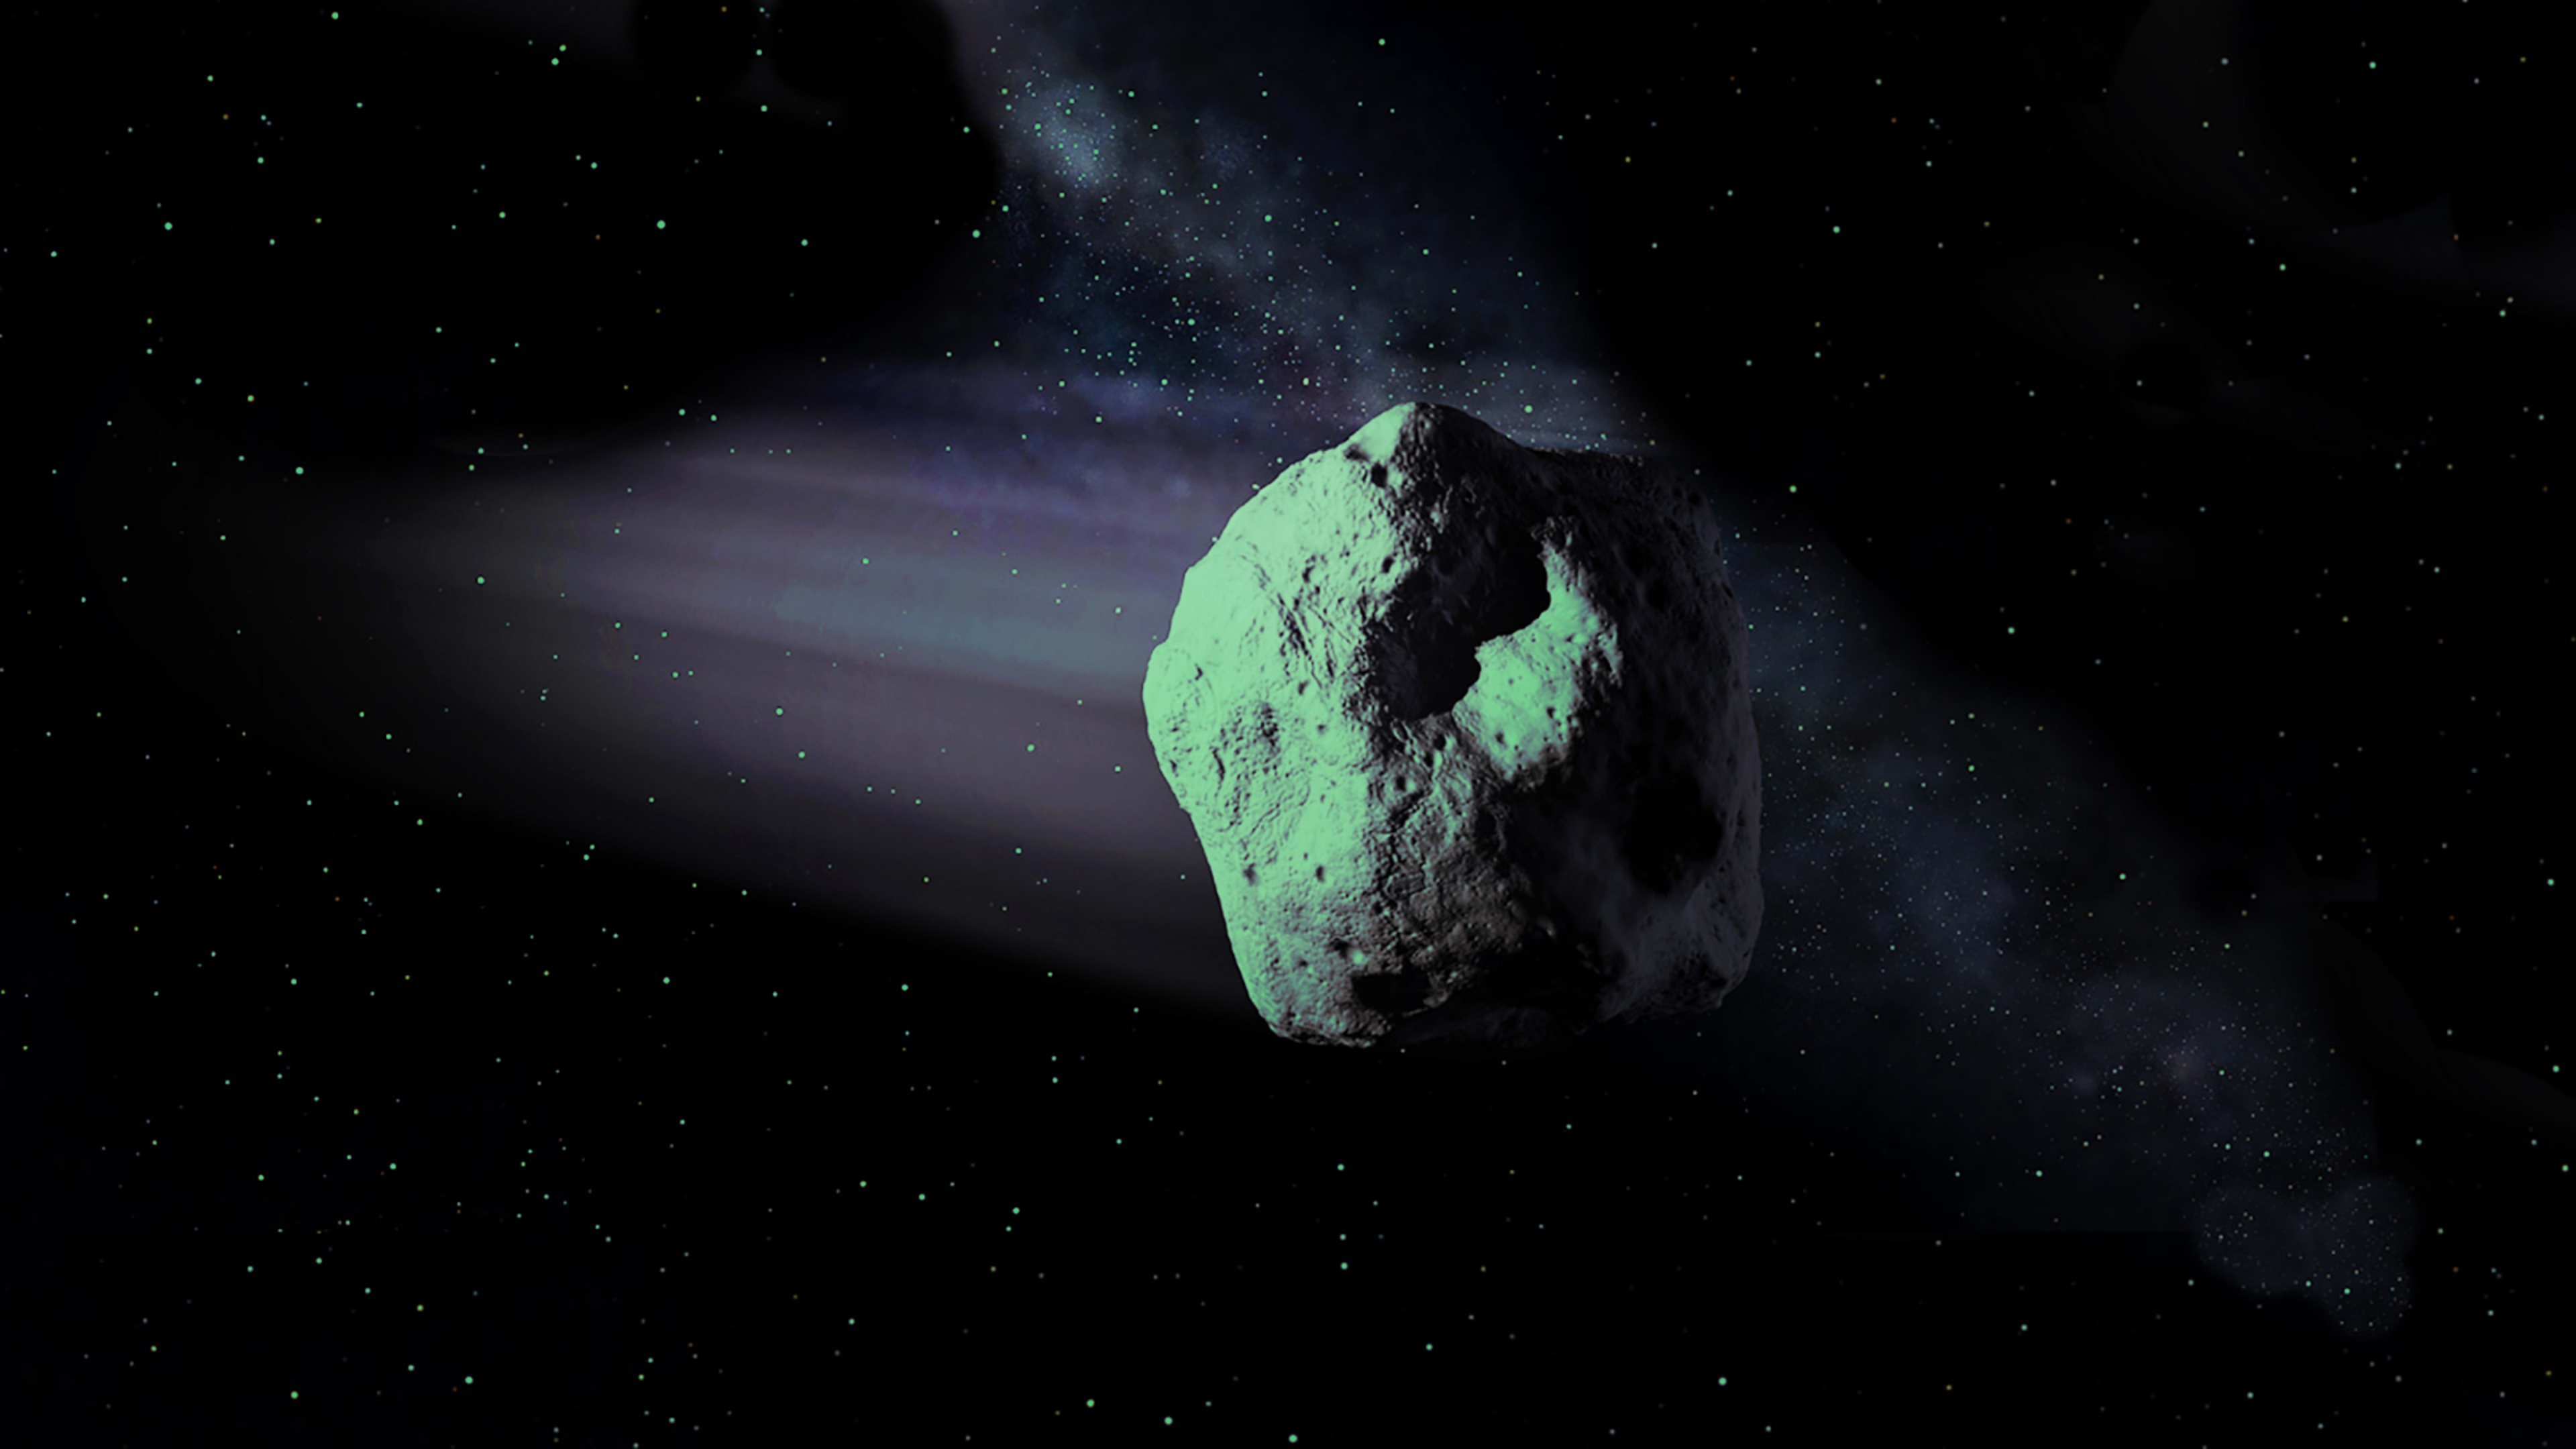 A football field-size asteroid snuck up on NASA and almost hit the Earth